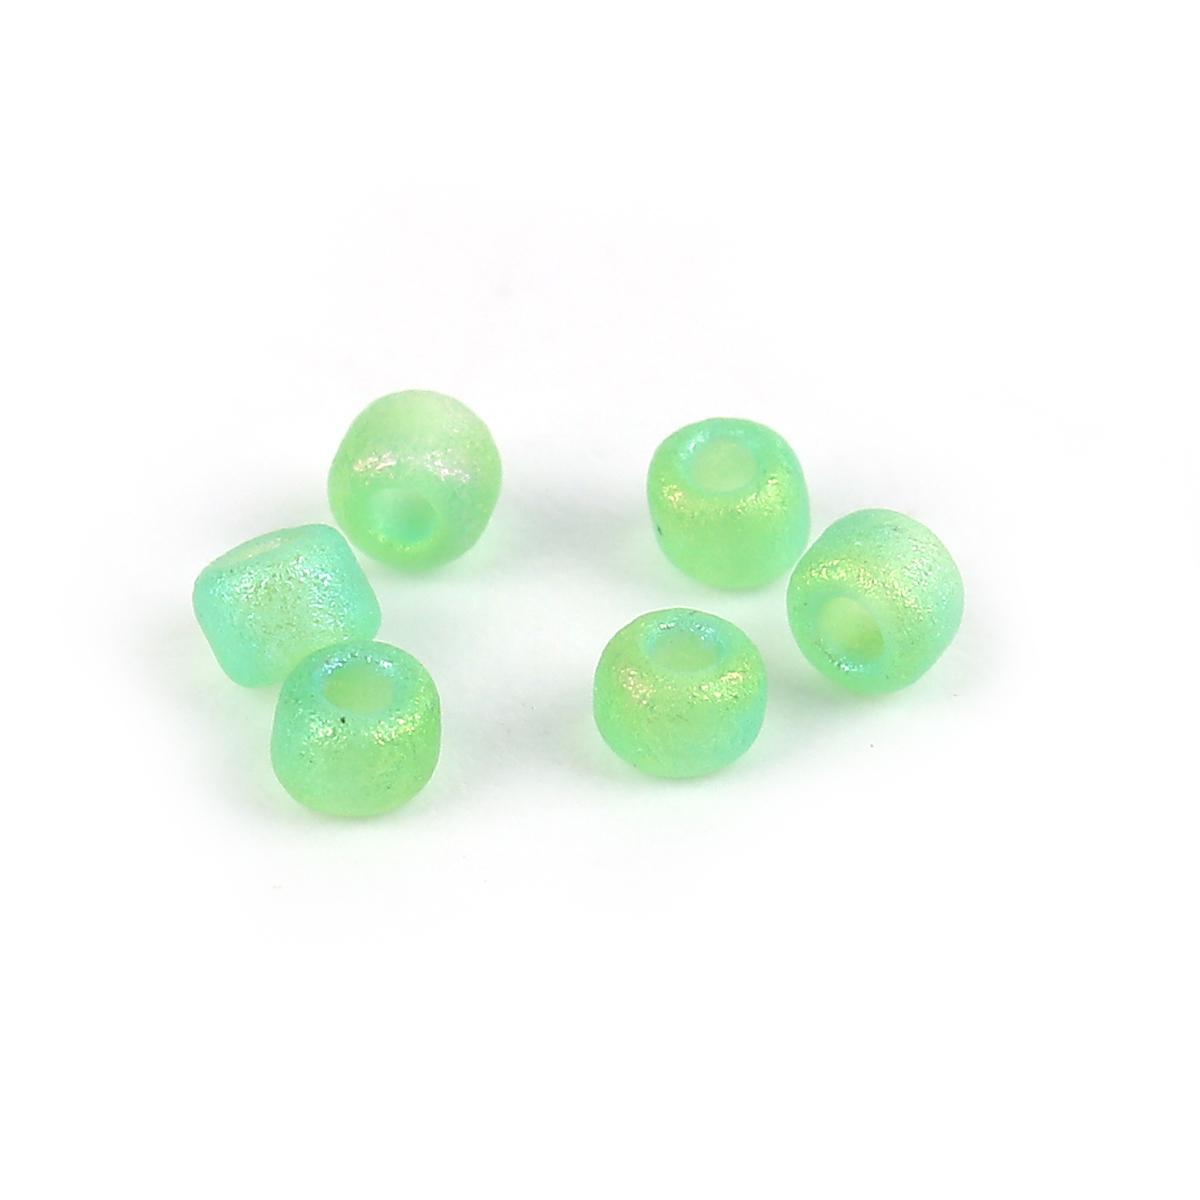 Picture of (Japan Import) Glass Seed Beads Round Green Rainbow Frosted Opaque About 2mm x 1.5mm, Hole: Approx 0.7mm, 60 Grams (Approx 95 PCs/Gram)